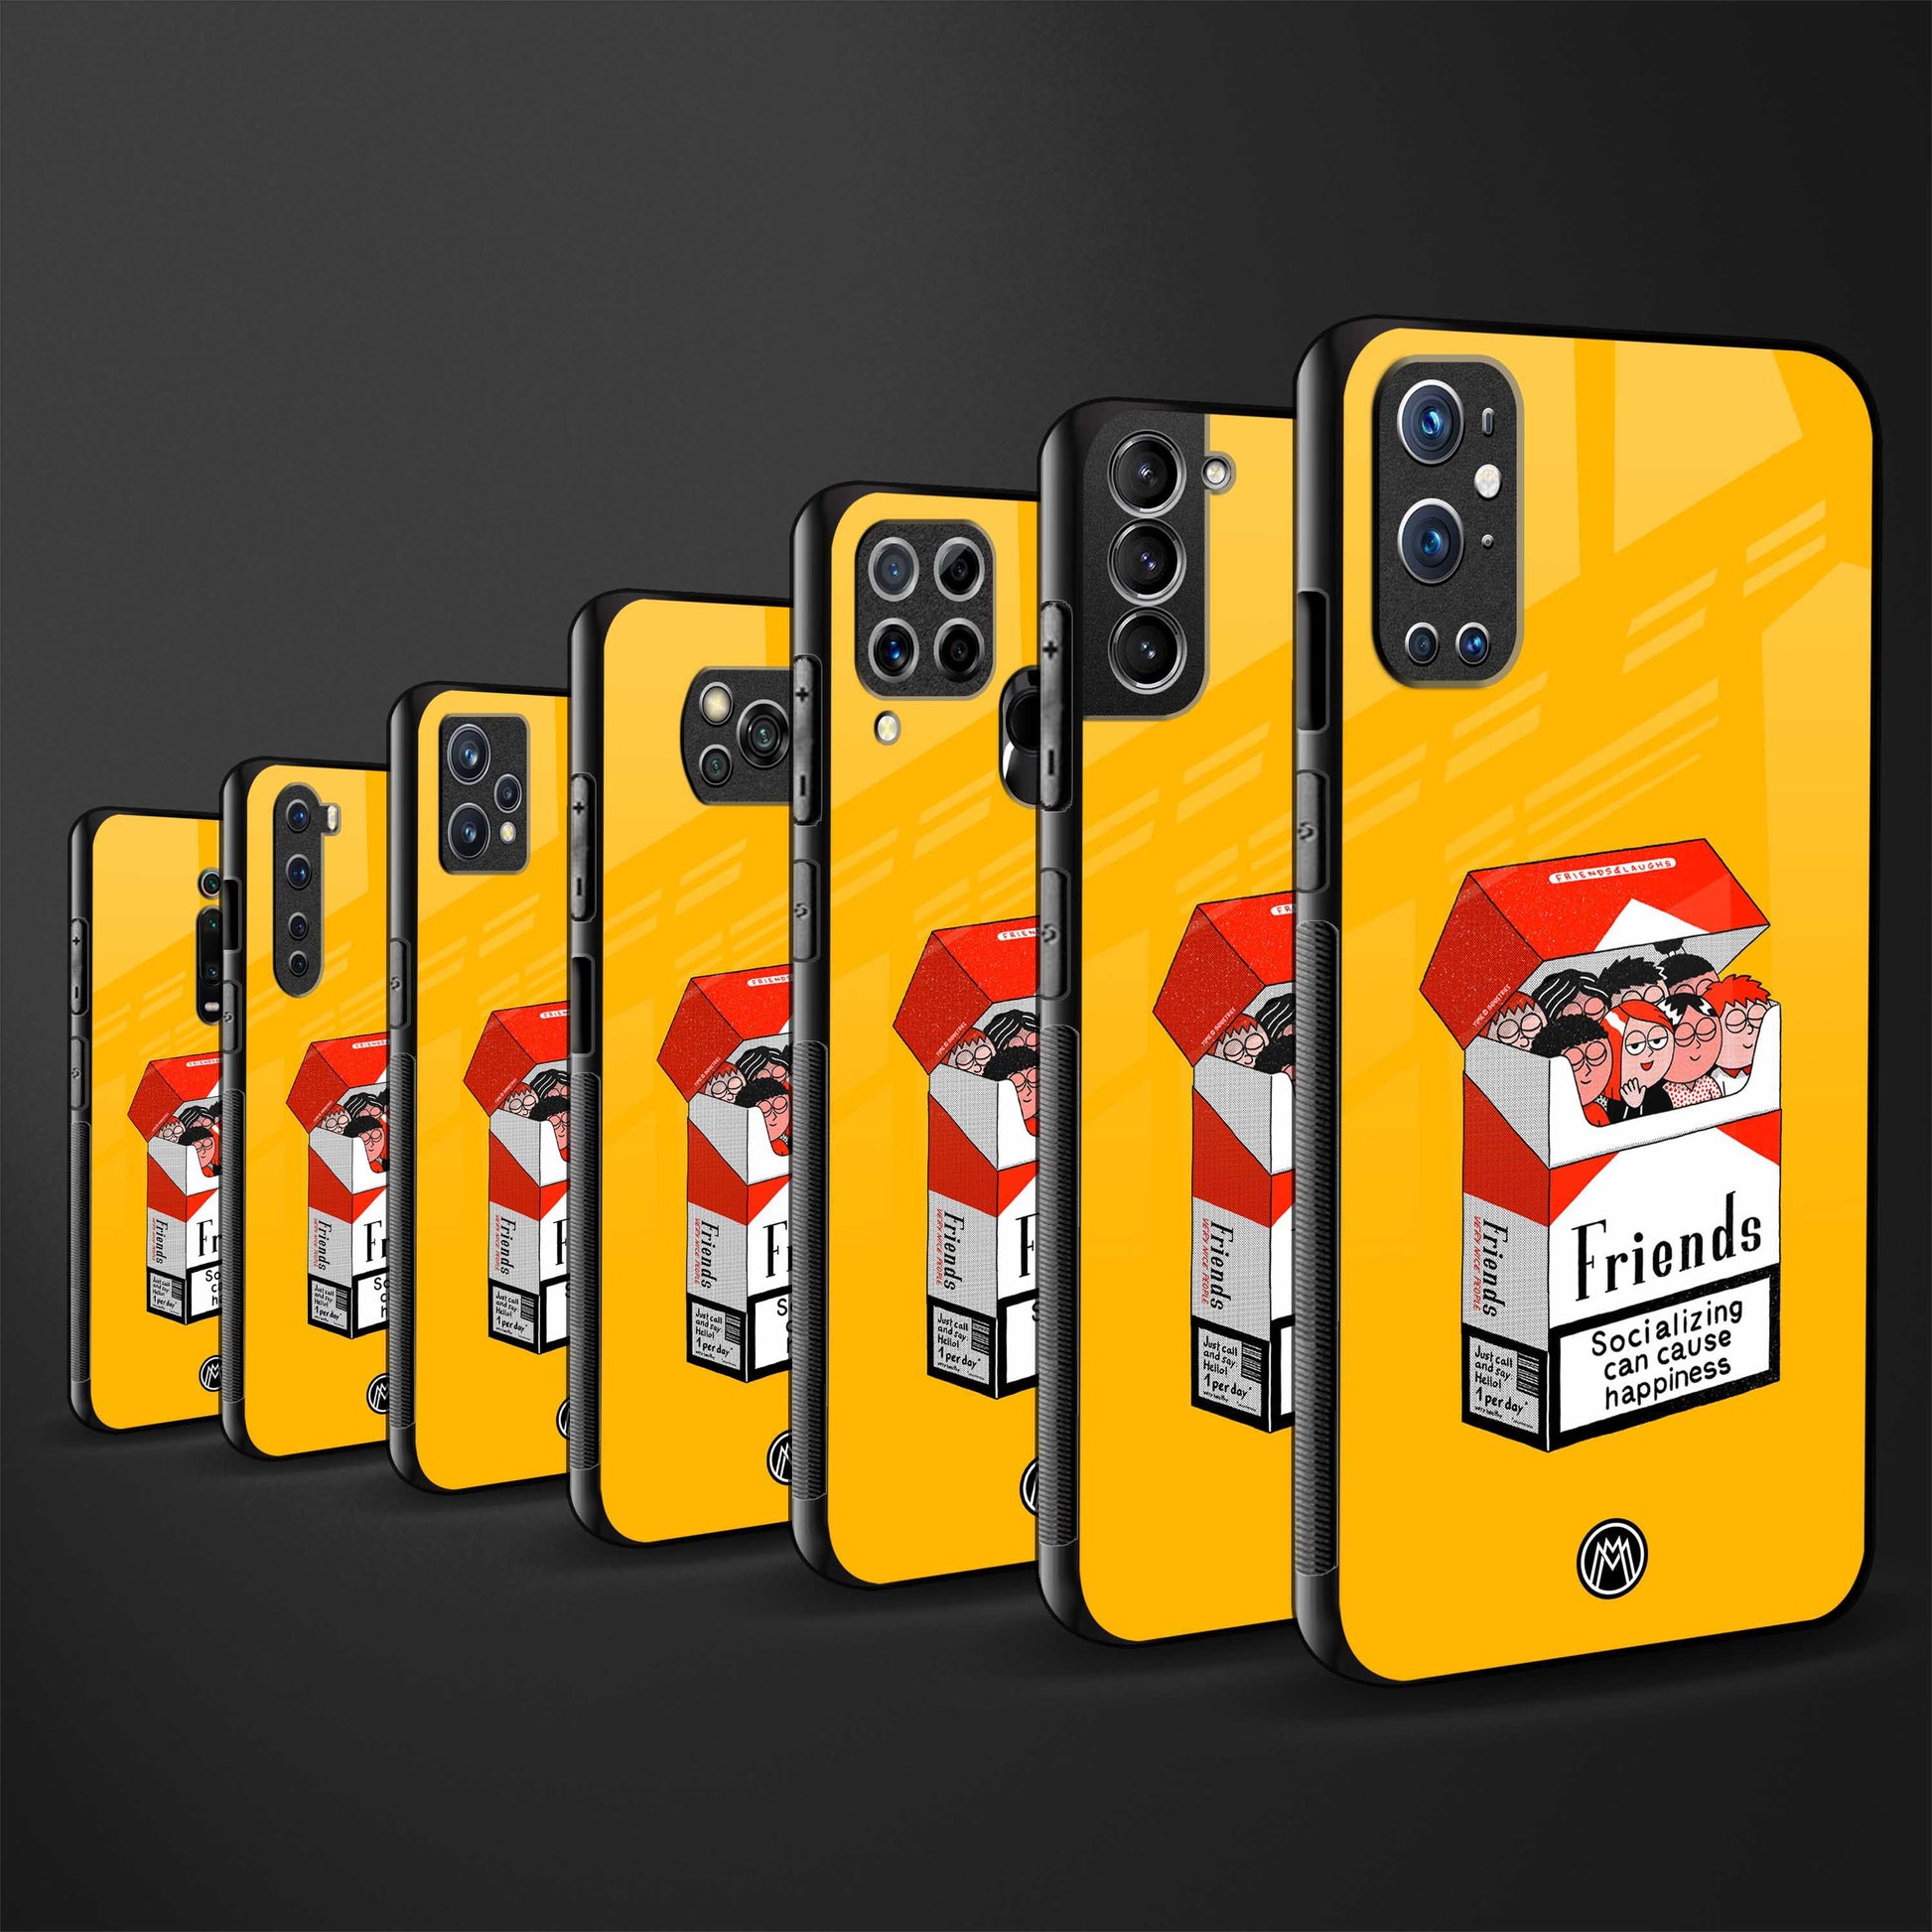 socializing can cause happiness glass case for iphone xs max image-3